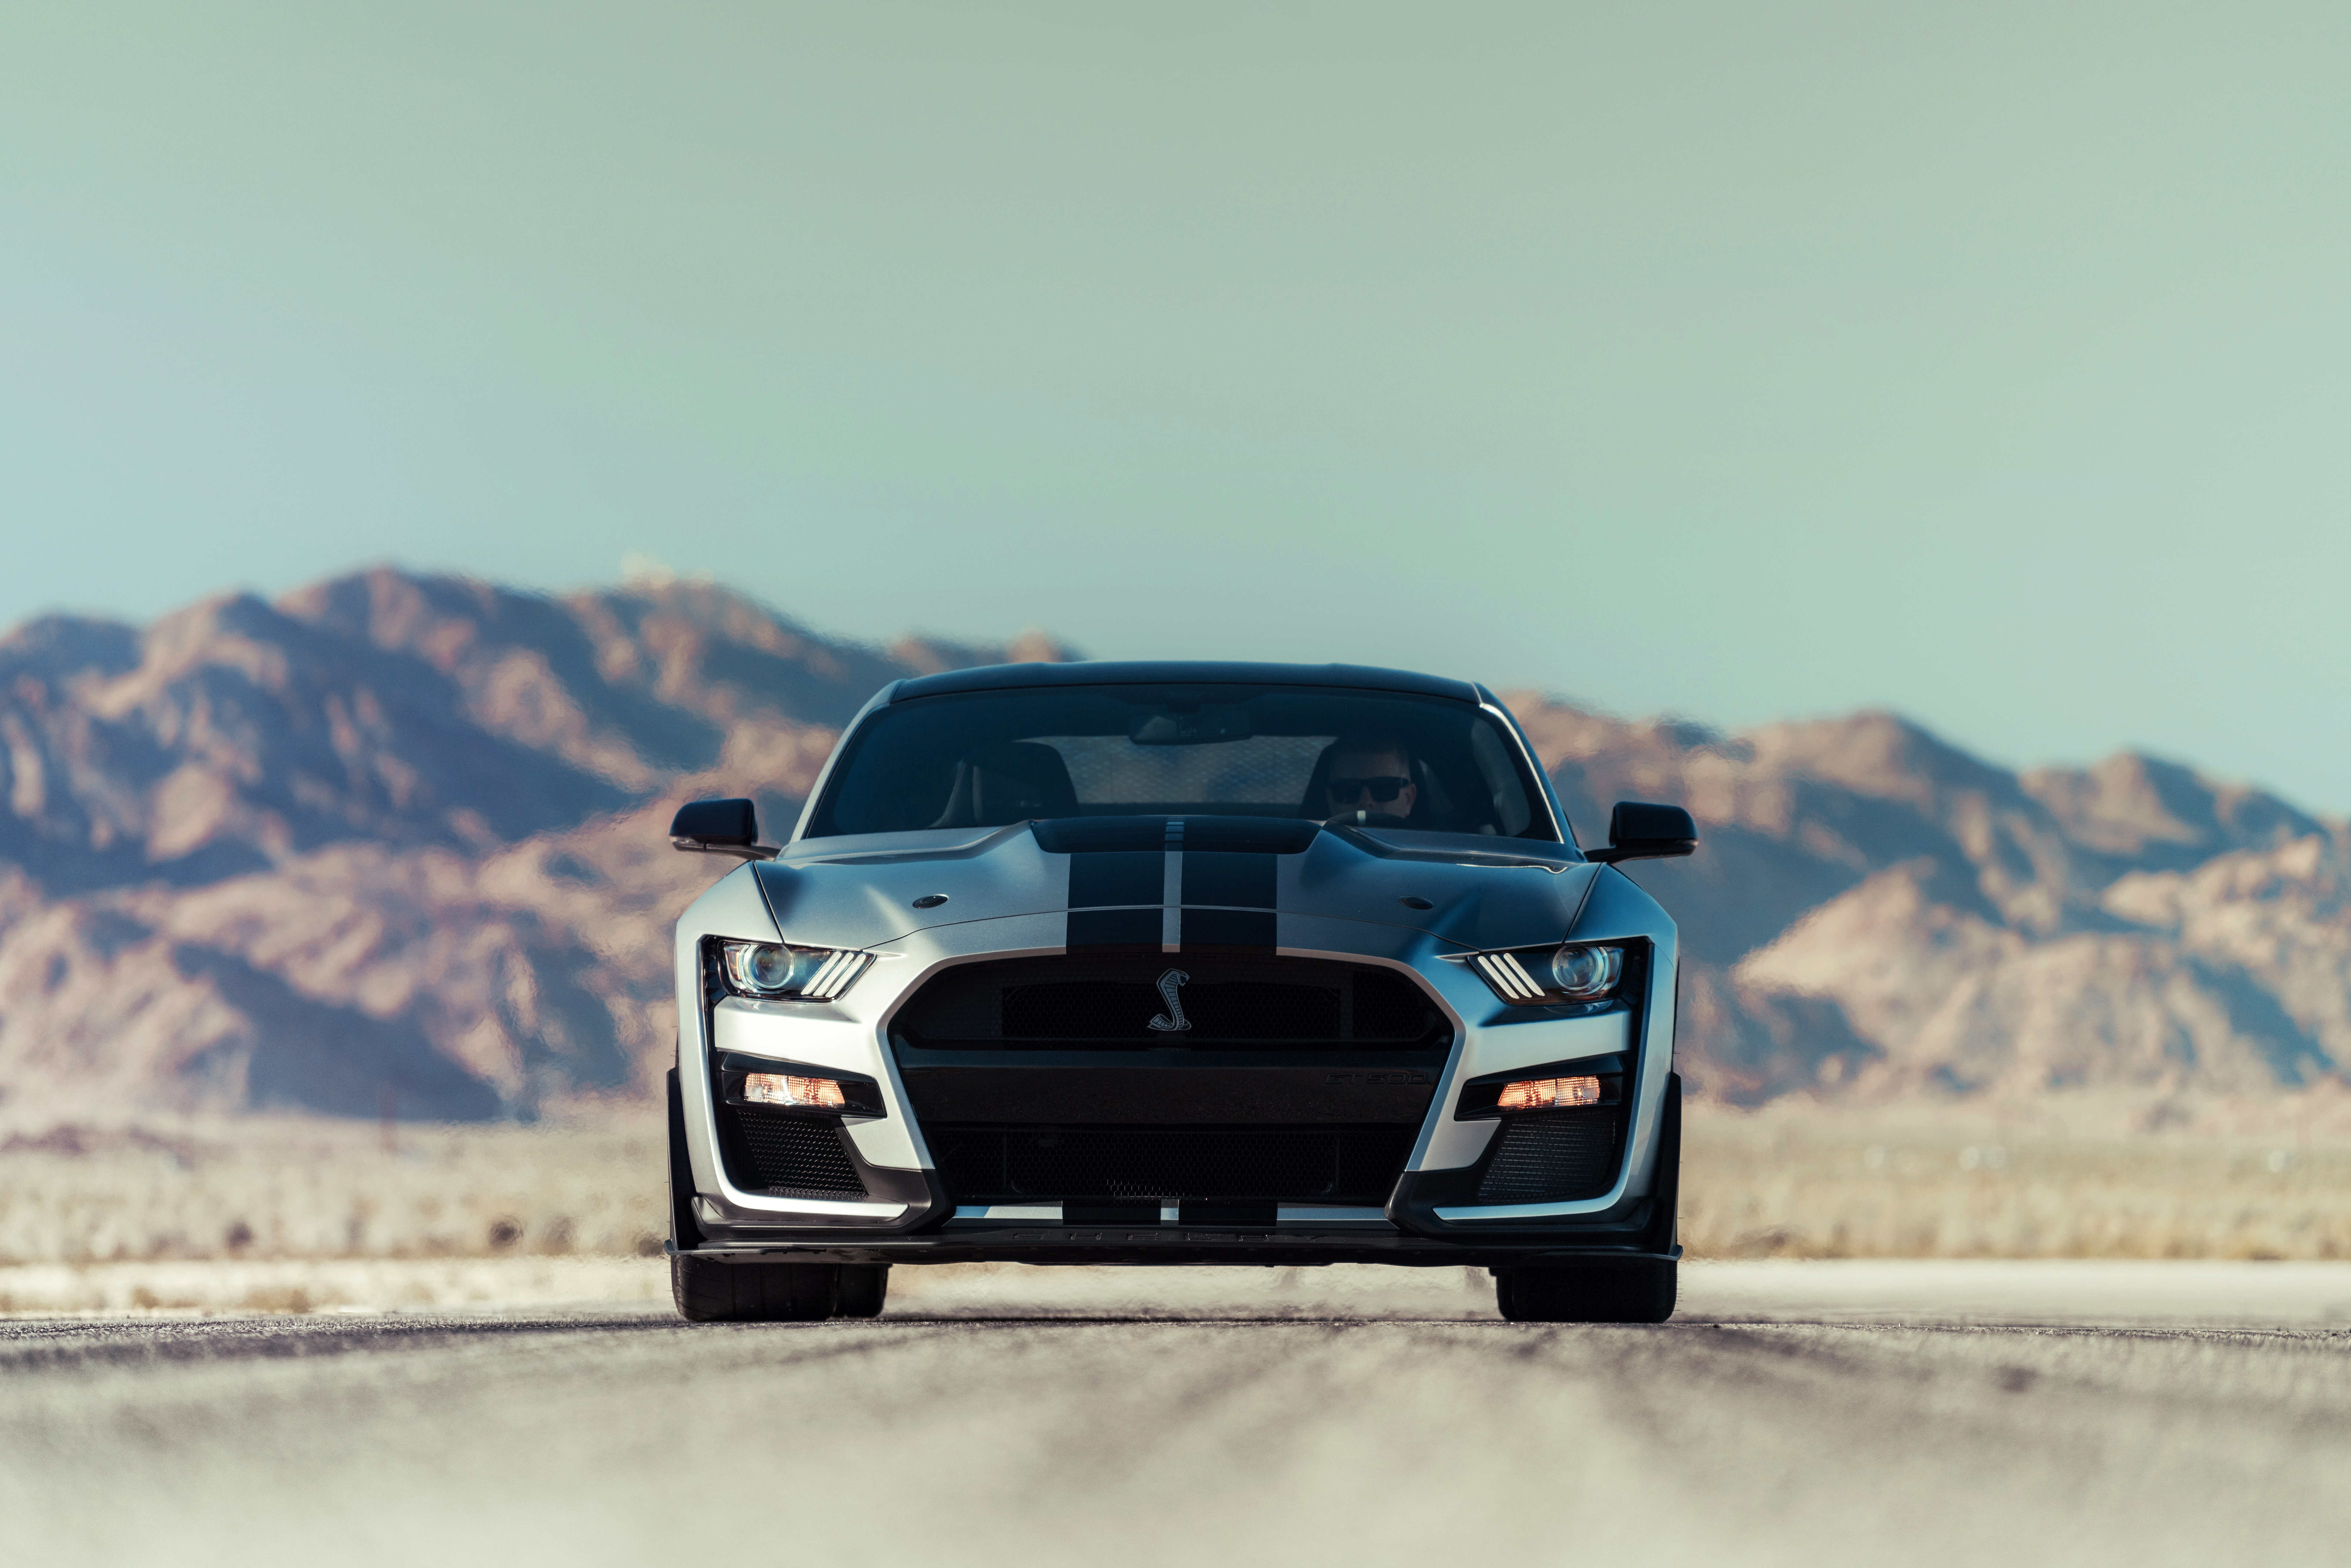 ford mustang, ford mustang shelby gt500, vehicles, car, ford mustang shelby, ford, muscle car, silver car